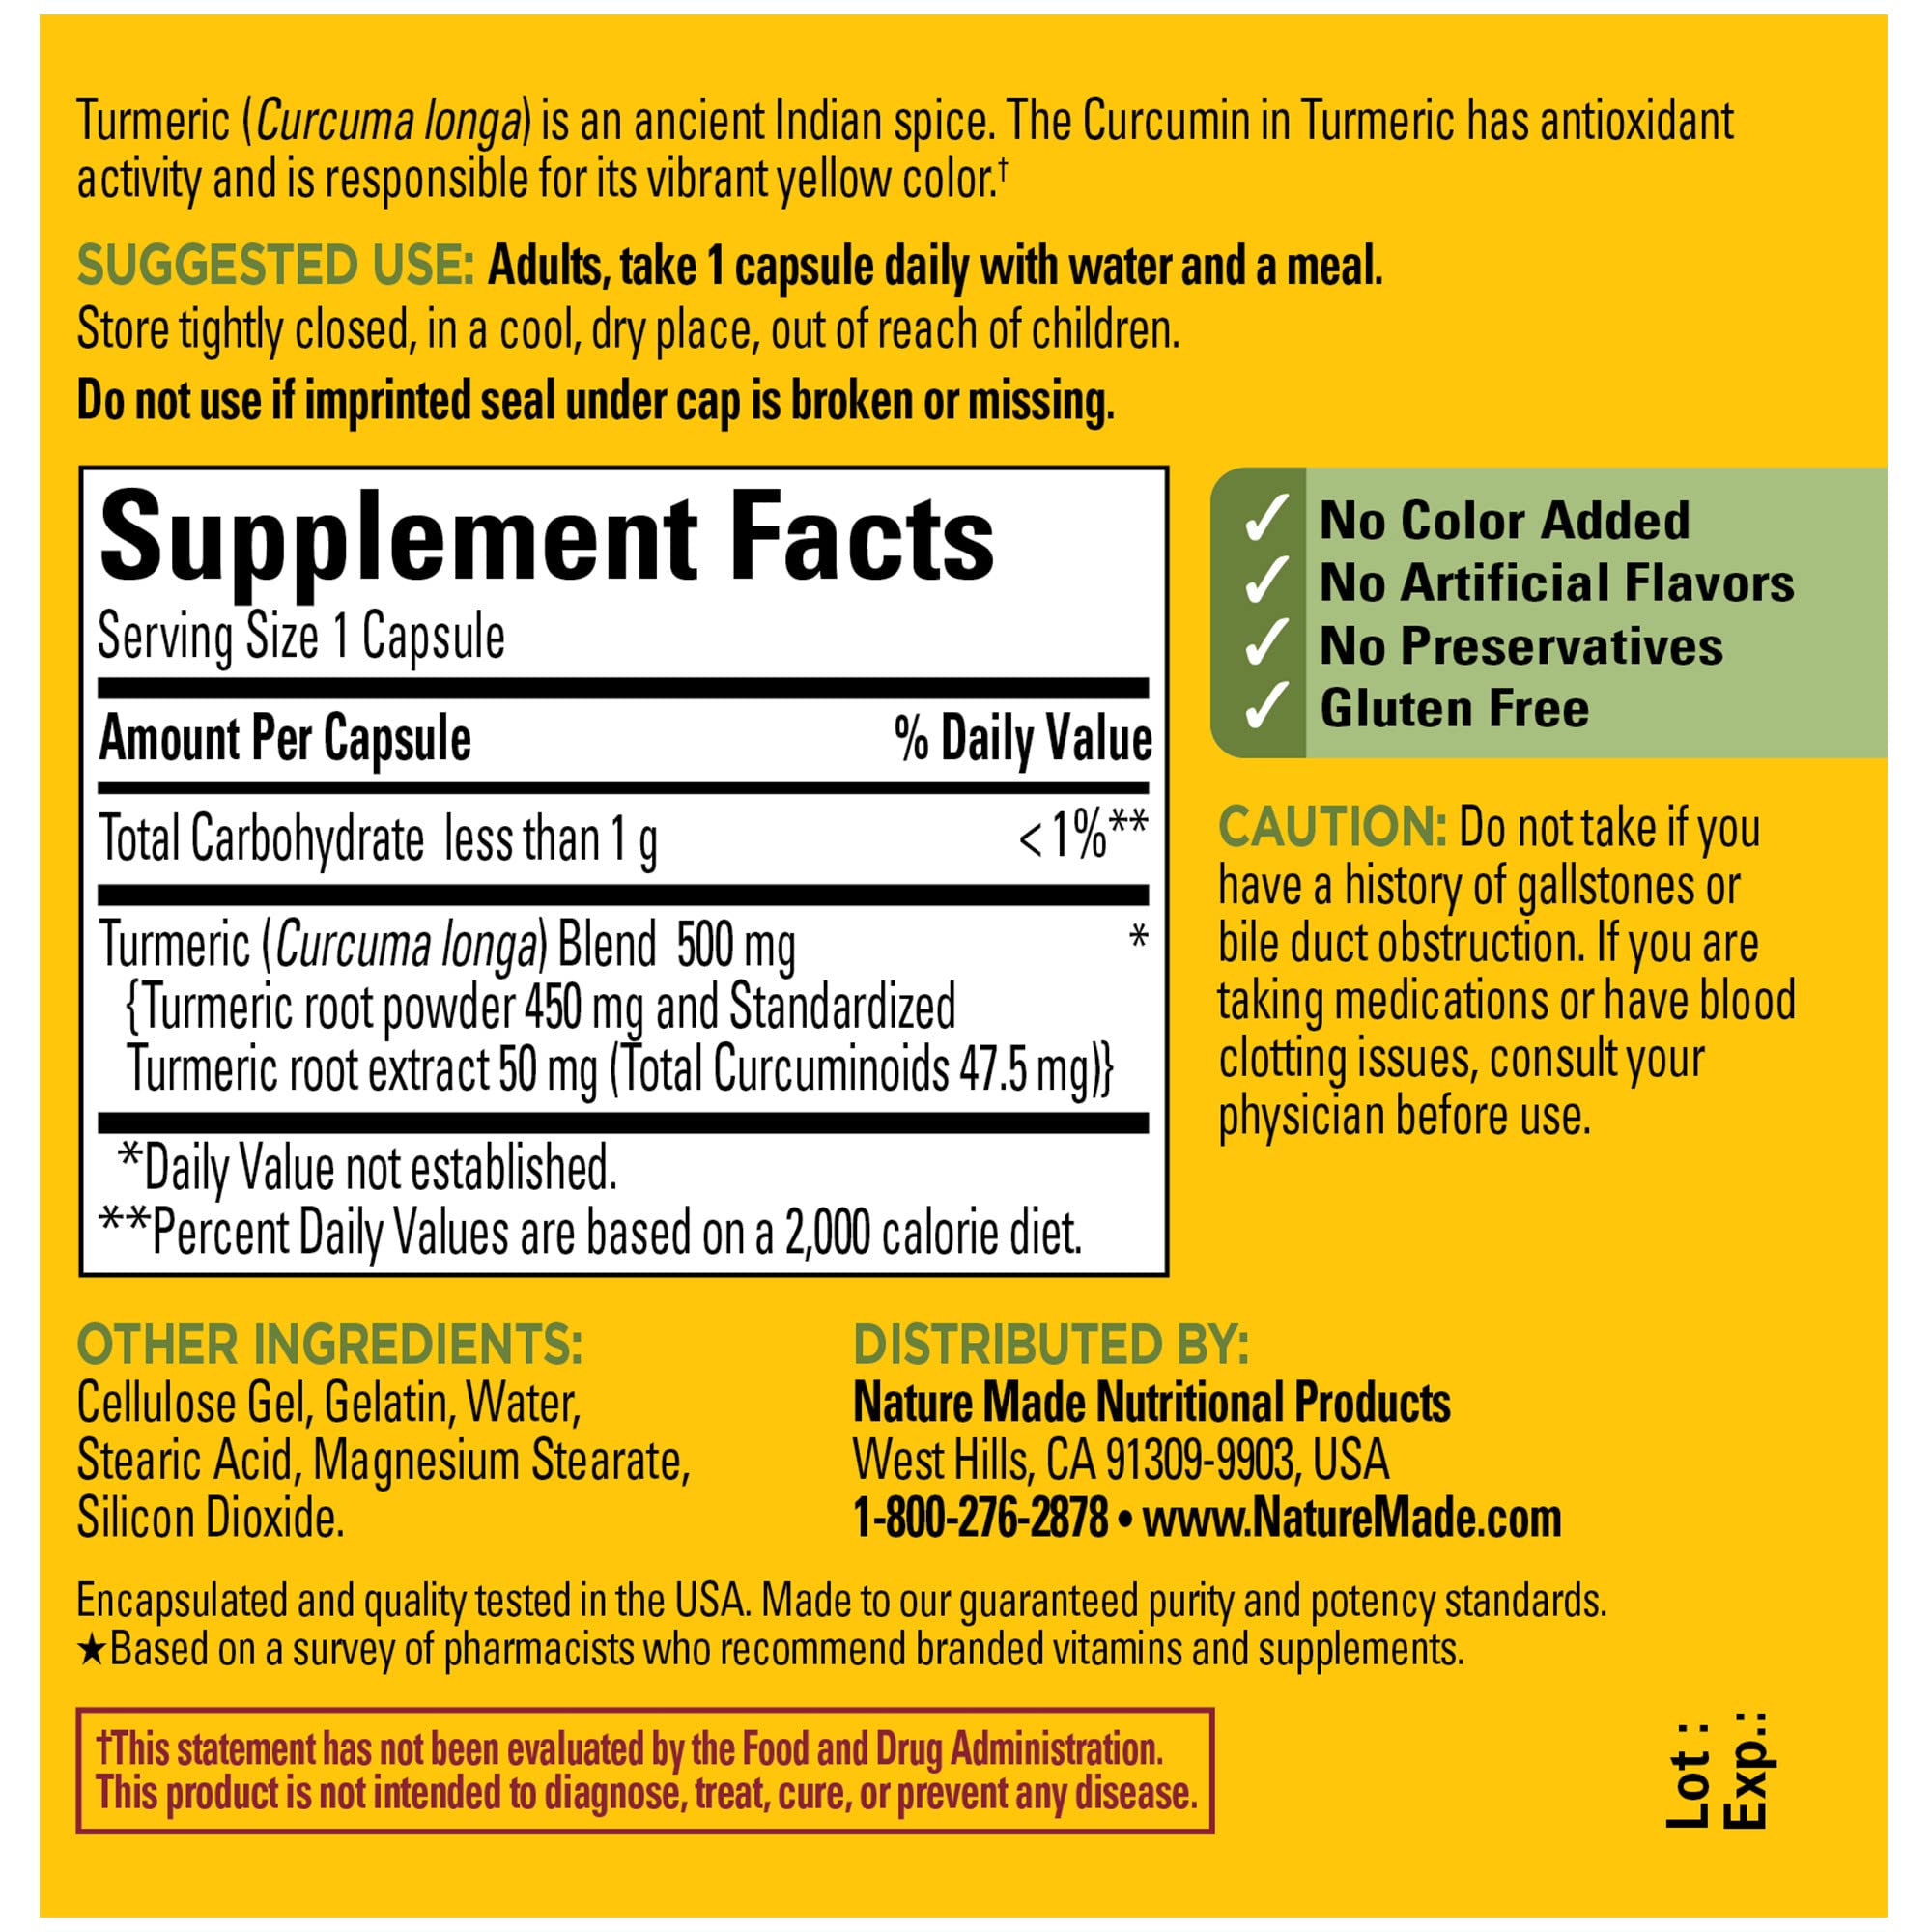 Nature Made Turmeric Curcumin 500 mg, Herbal Supplement for Antioxidant Support, 60 Capsules, 60 Day Supply